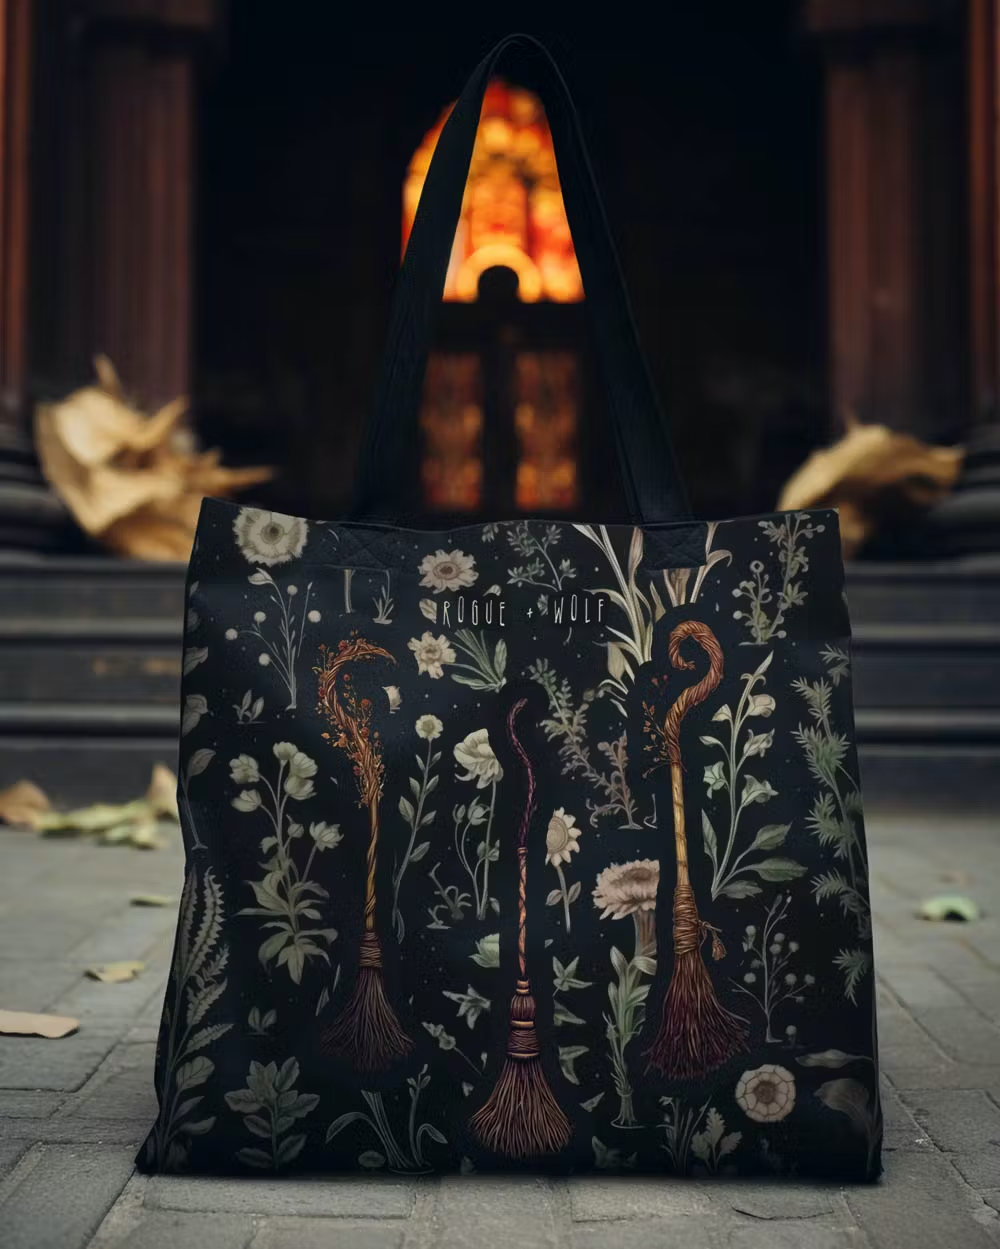 Witches' Broomsticks Vegan Tote Bag for Women - Dark Academia